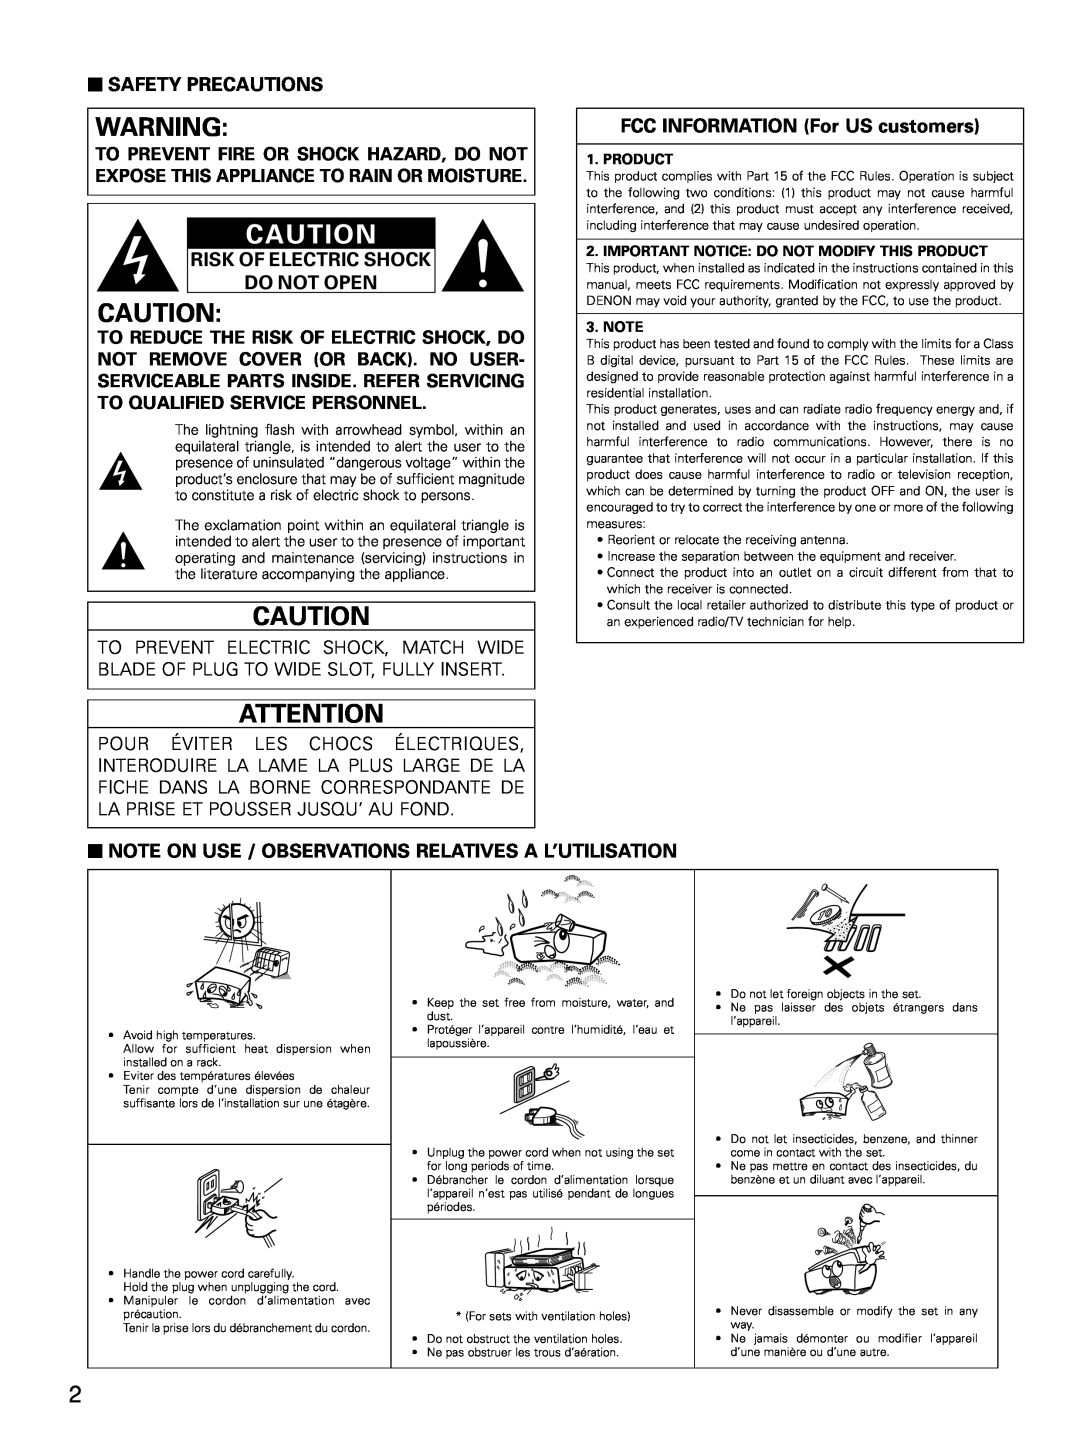 Denon D-M51DVS, ADVM51, ADV-M51 2SAFETY PRECAUTIONS, Risk Of Electric Shock Do Not Open, FCC INFORMATION For US customers 